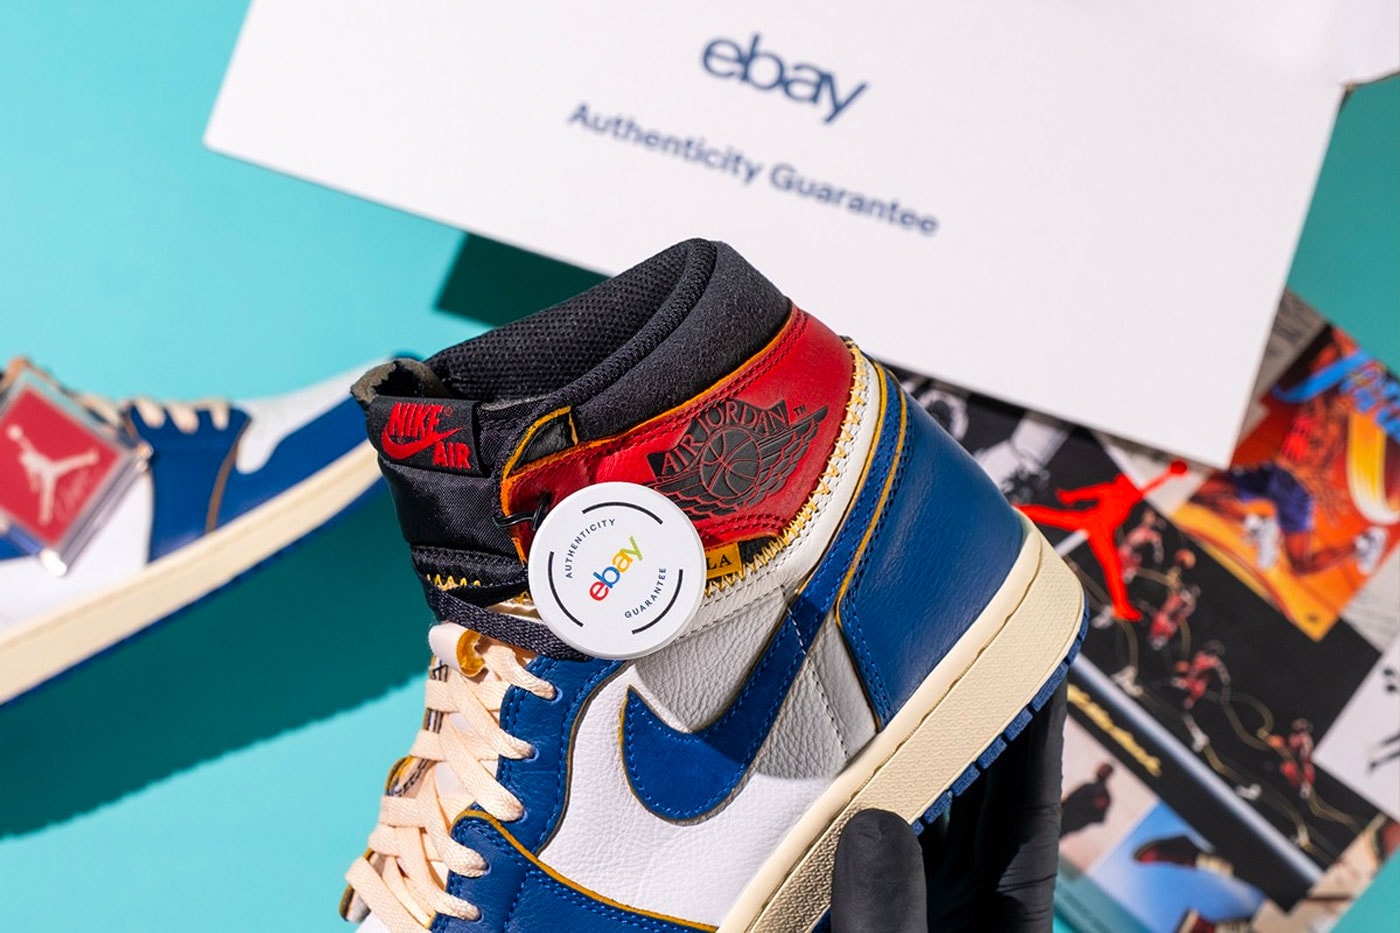 Ebay Officially Acquires Footwear Authentication Service, Sneaker Con nike air jordan adidas nike dunk 